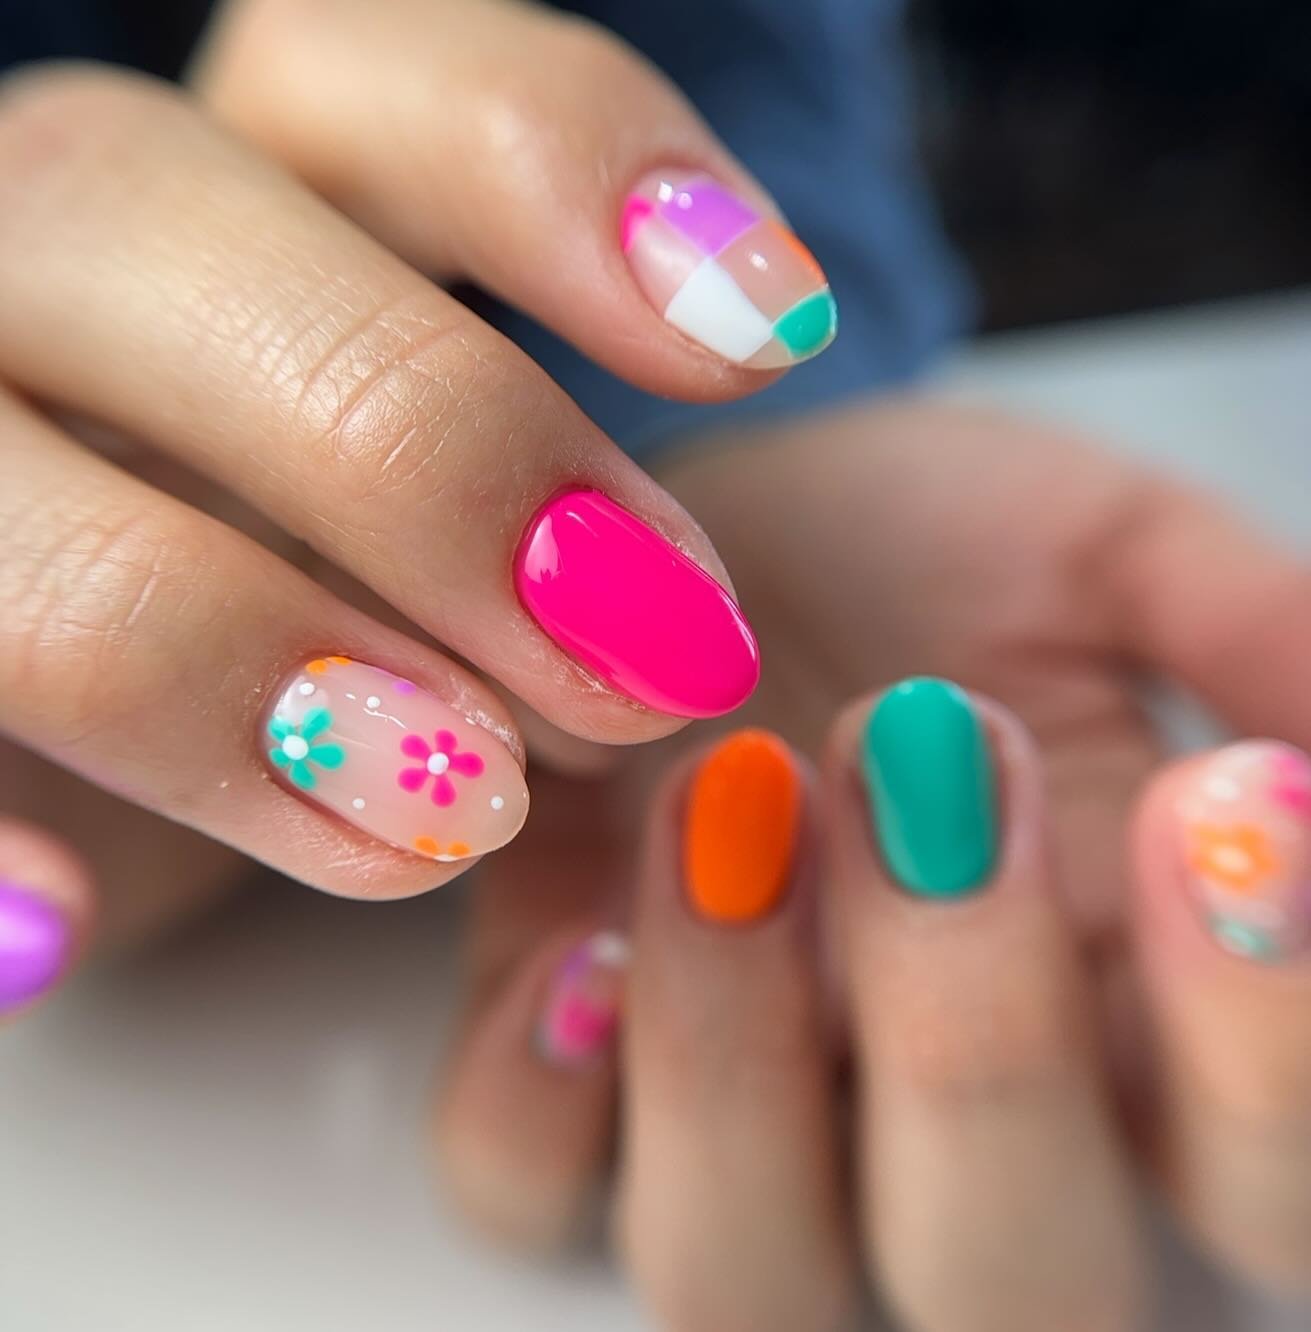 These bright, summery nails are CRUISE READY 😍🛳️🏖️

&bull;
&bull;
&bull;
#nails #summernails #utahnails #ogdennails #utahnailtech #ogdennailtech #brightnails #structuredgelmanicure #structuredgelnails #nailinspo #lather #lathersalonutah